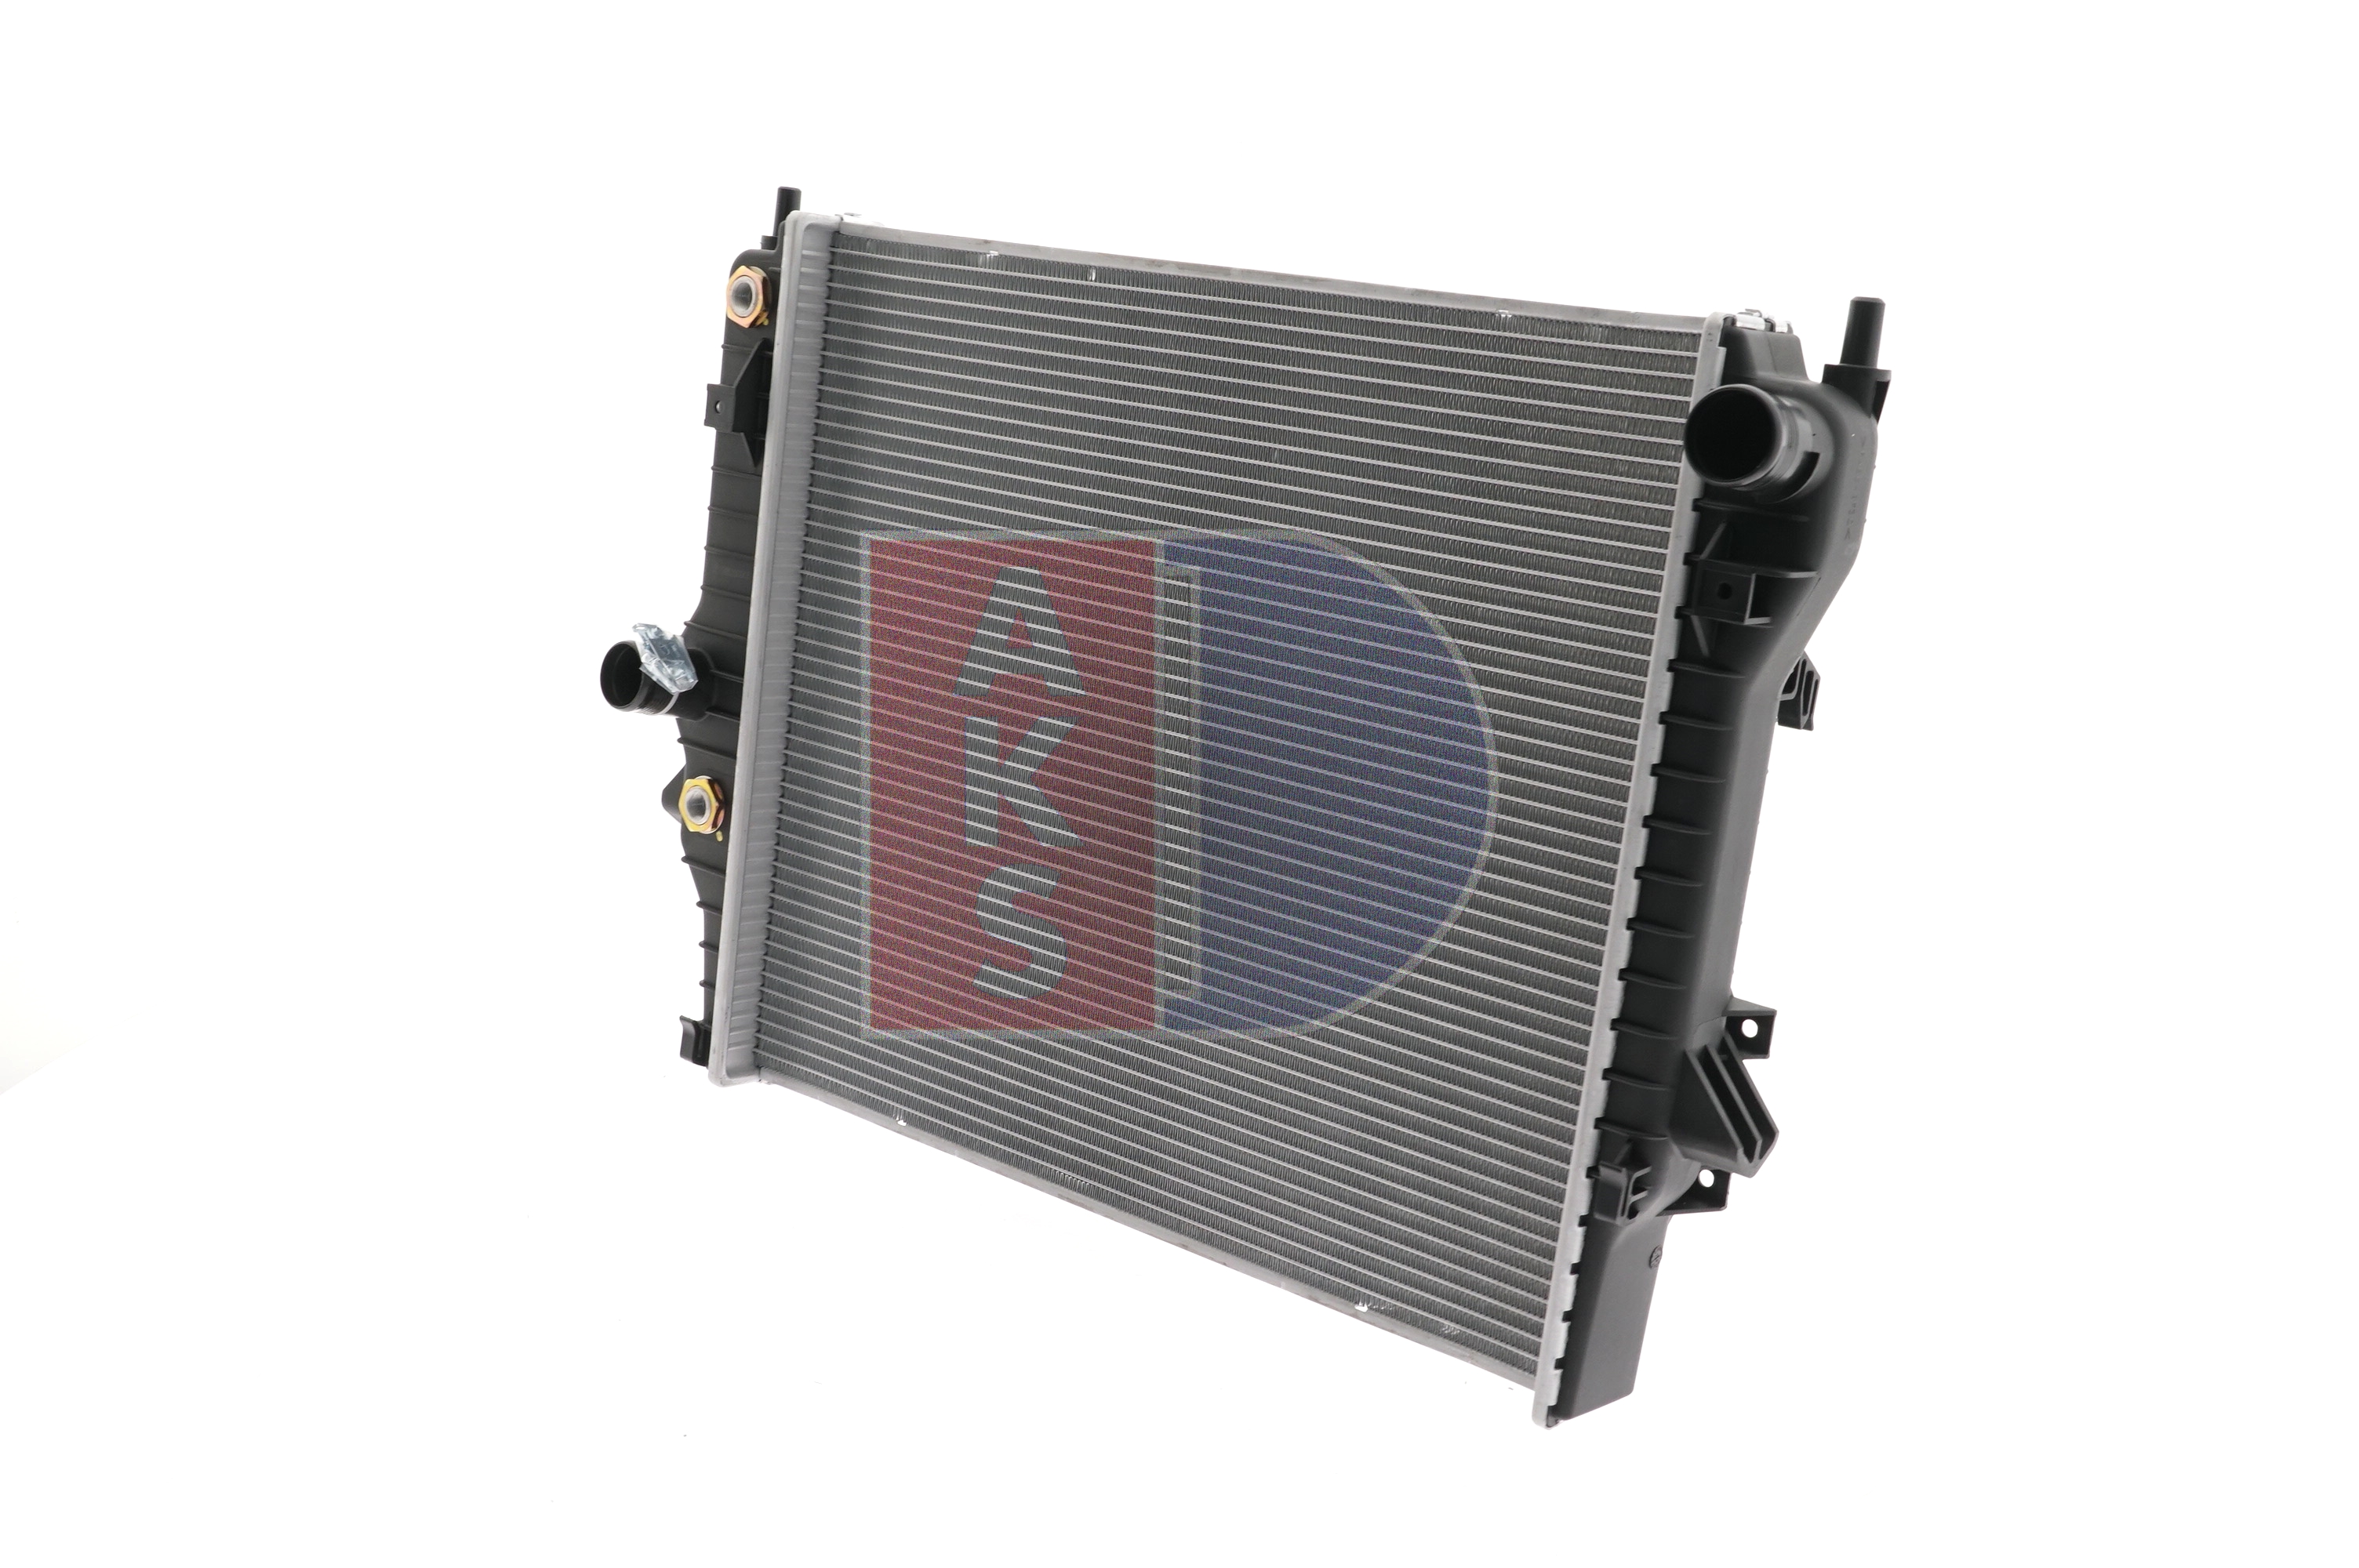 AKS DASIS 370042N Engine radiator Aluminium, for vehicles with/without air conditioning, 570 x 528 x 26 mm, Automatic Transmission, Brazed cooling fins